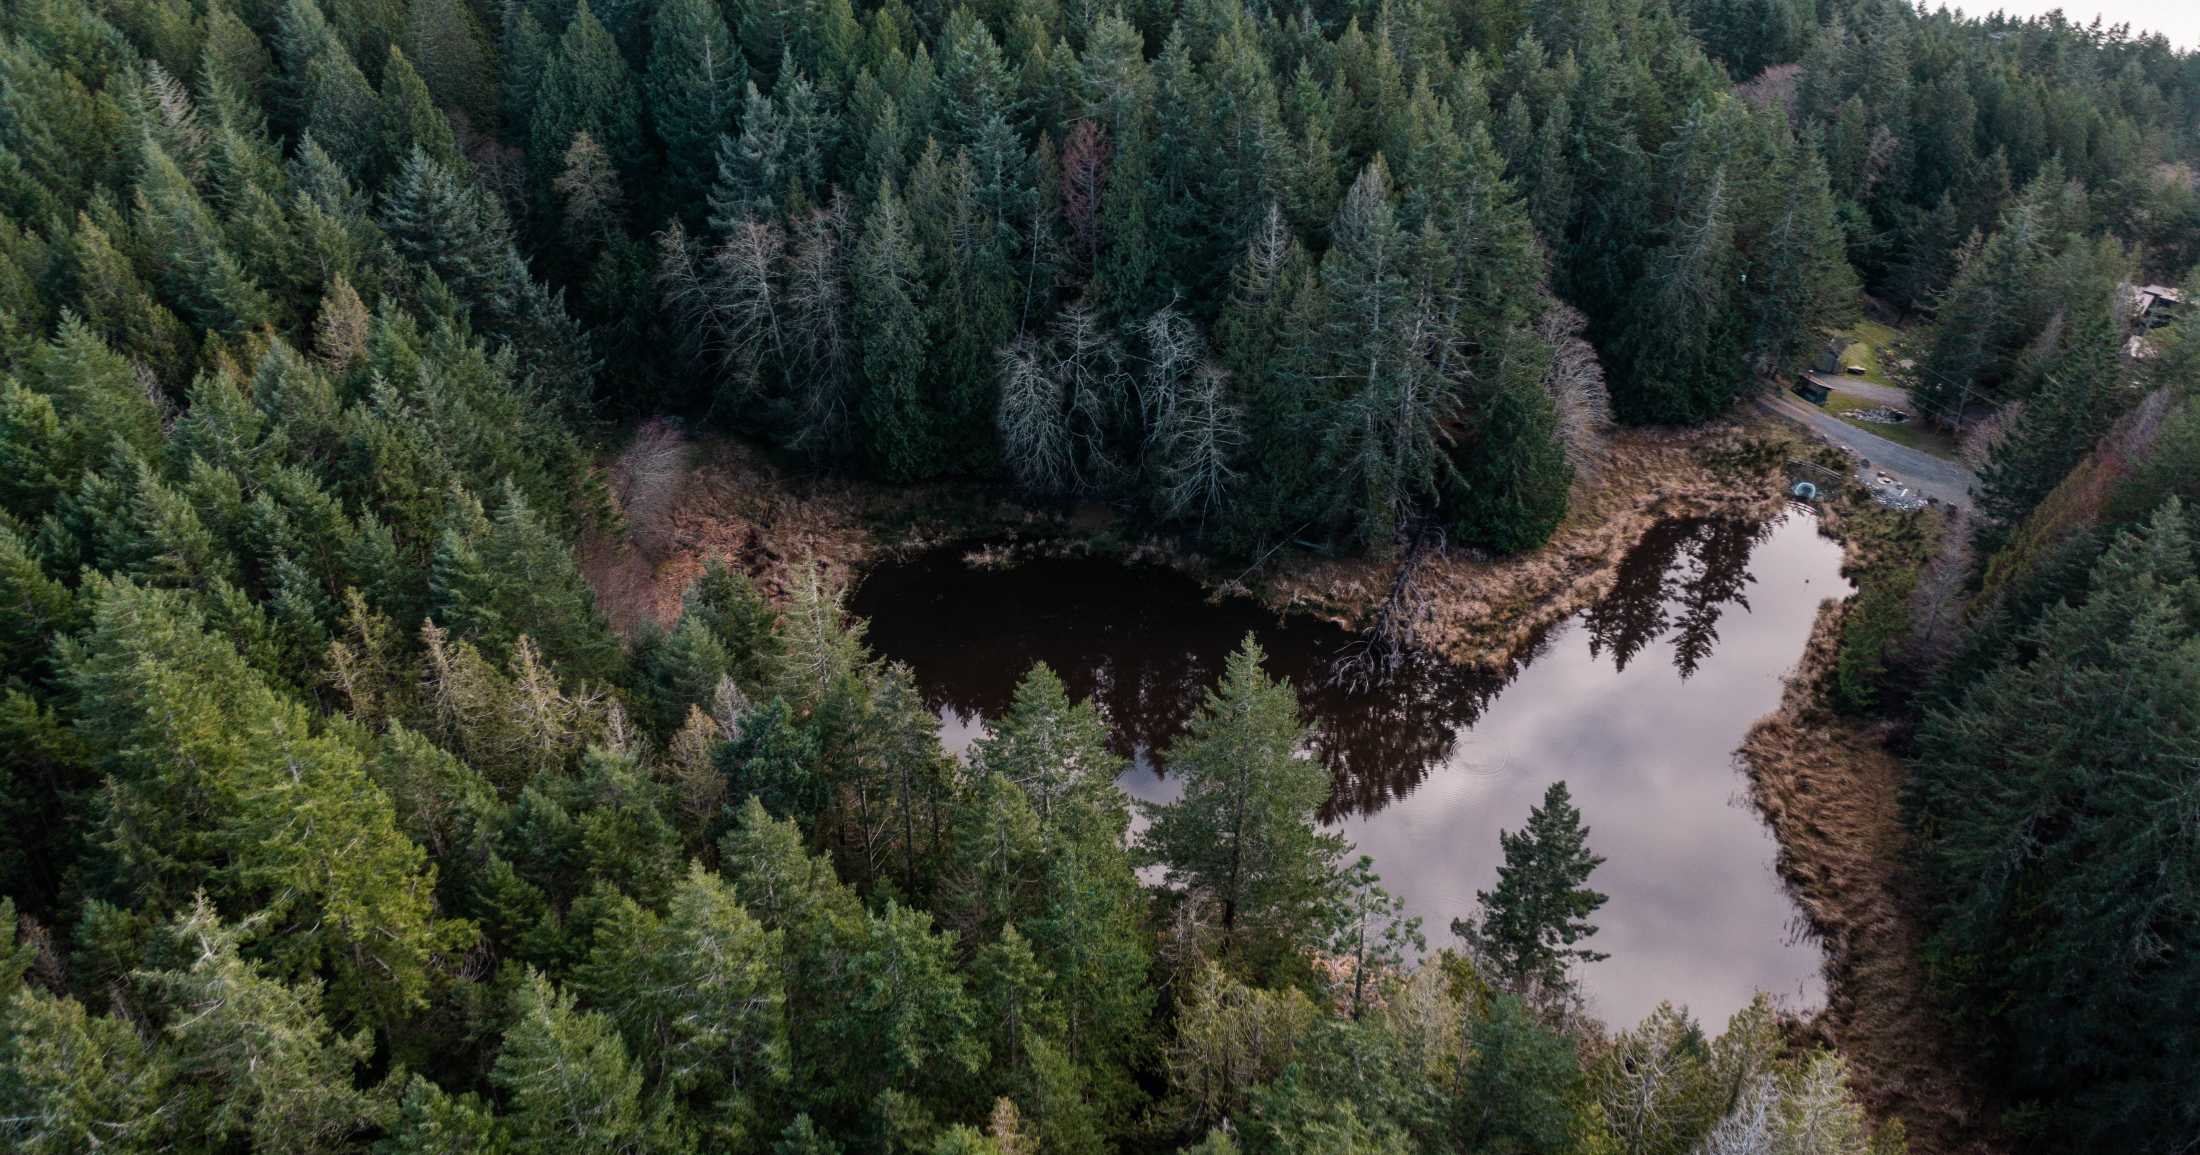 View of a small area of water surrounded by forest on North Pender Island.